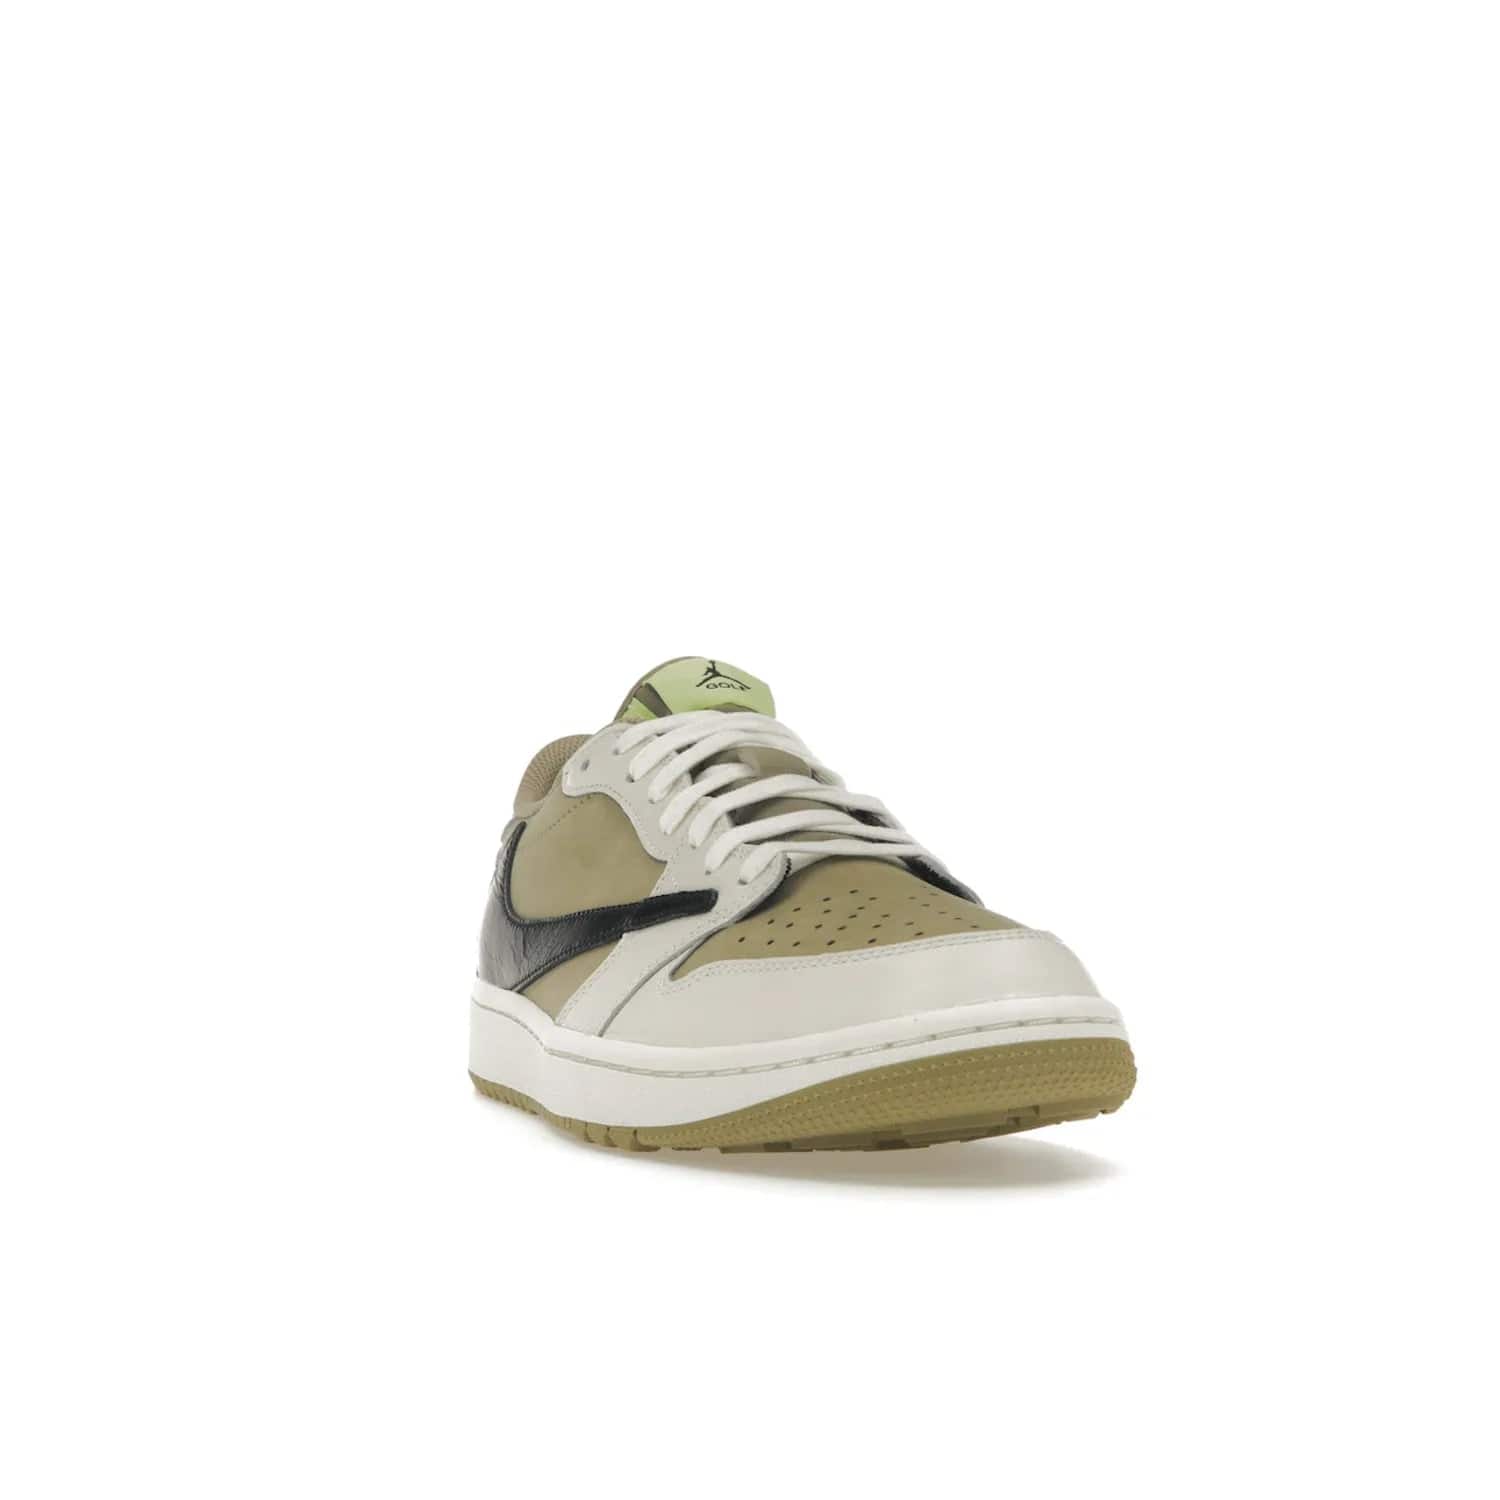 Jordan 1 Retro Low Golf Travis Scott Neutral Olive - Image 8 - Only at www.BallersClubKickz.com - Explore the unique Jordan 1 Retro Low Golf Travis Scott Neutral Olive, an olive-green sneaker collaboration between the iconic Jordan Brand and music royalty, Travis Scott. This special pair is tailored for the golf course with altered traction, hardened rubber, and a sleek style perfect for everyday wear. Get your pair and impress the crowd with its signature earth tones.